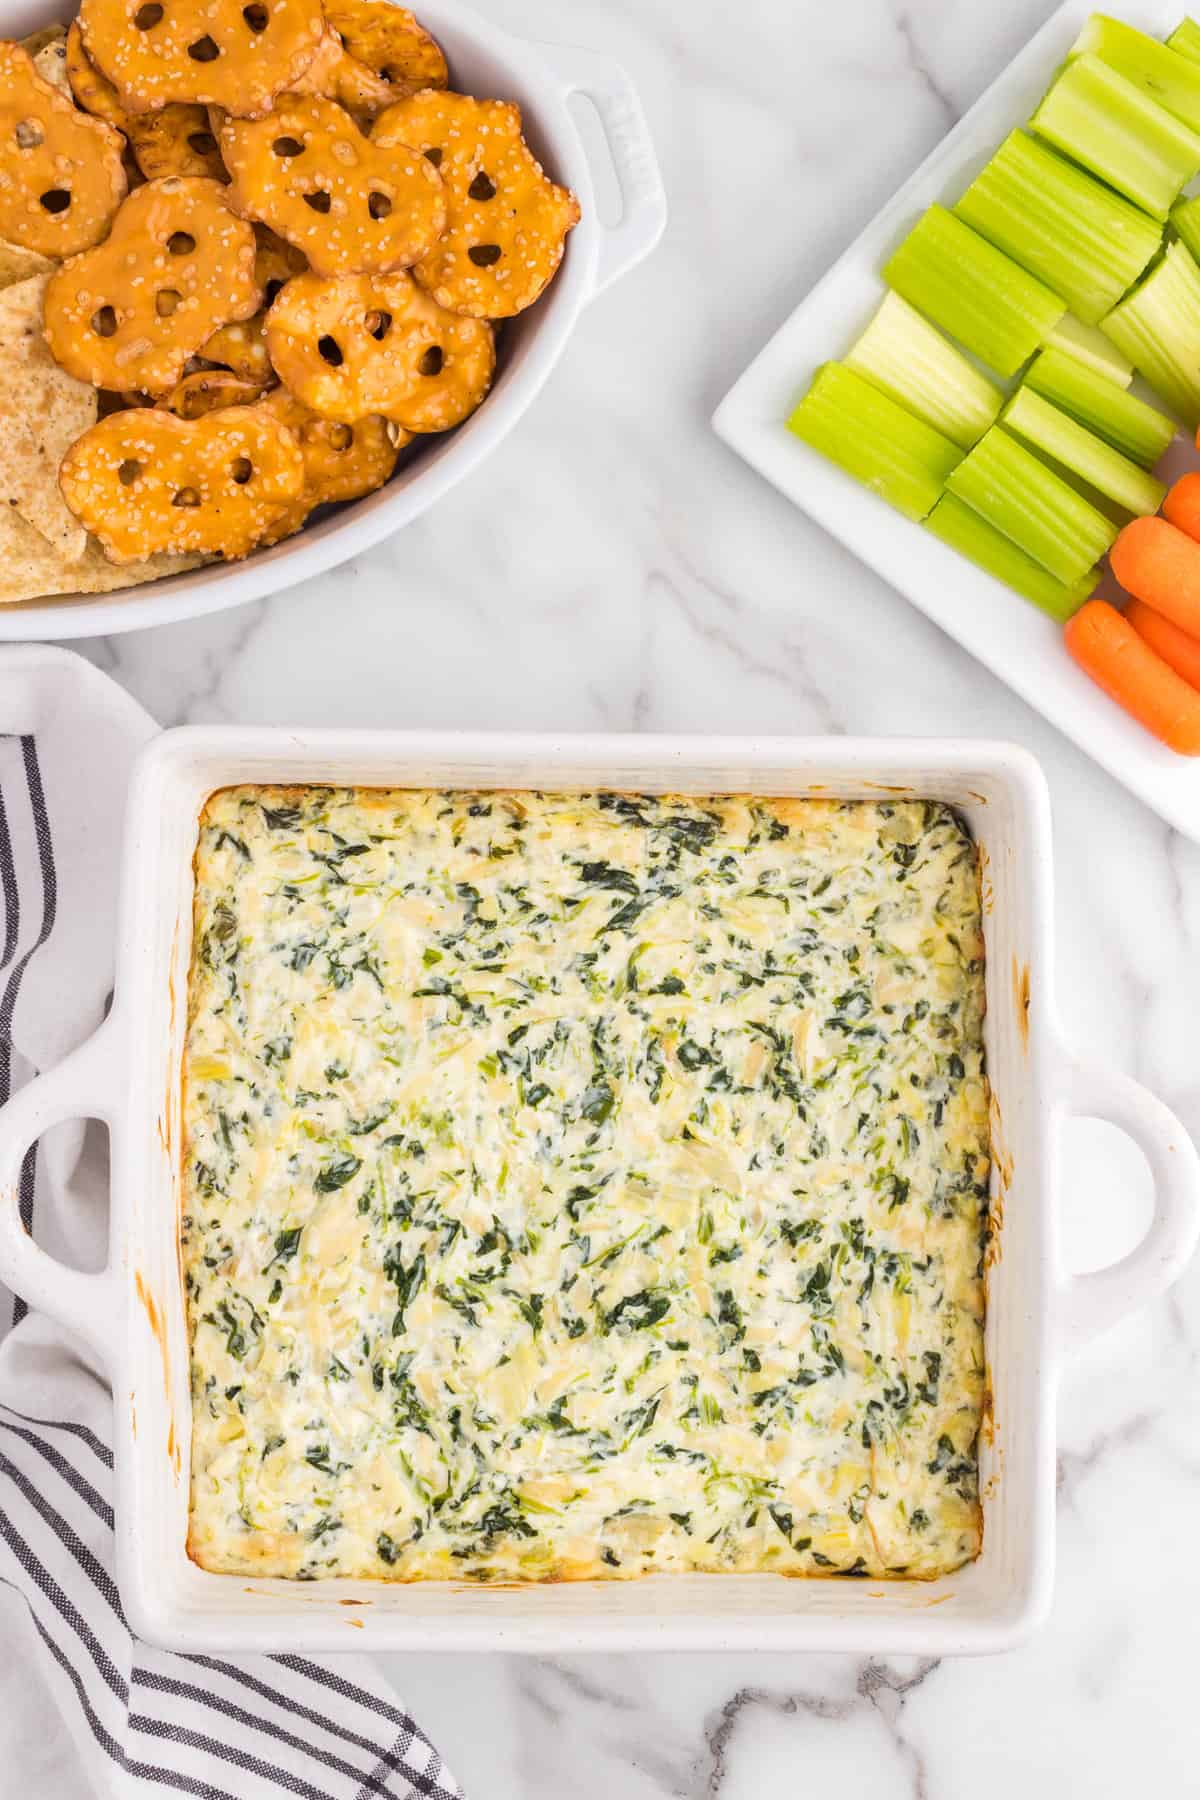 Spinach Artichoke Dip baked to a golden brown in square baking dish with dipper options arranged in bowls & on plates